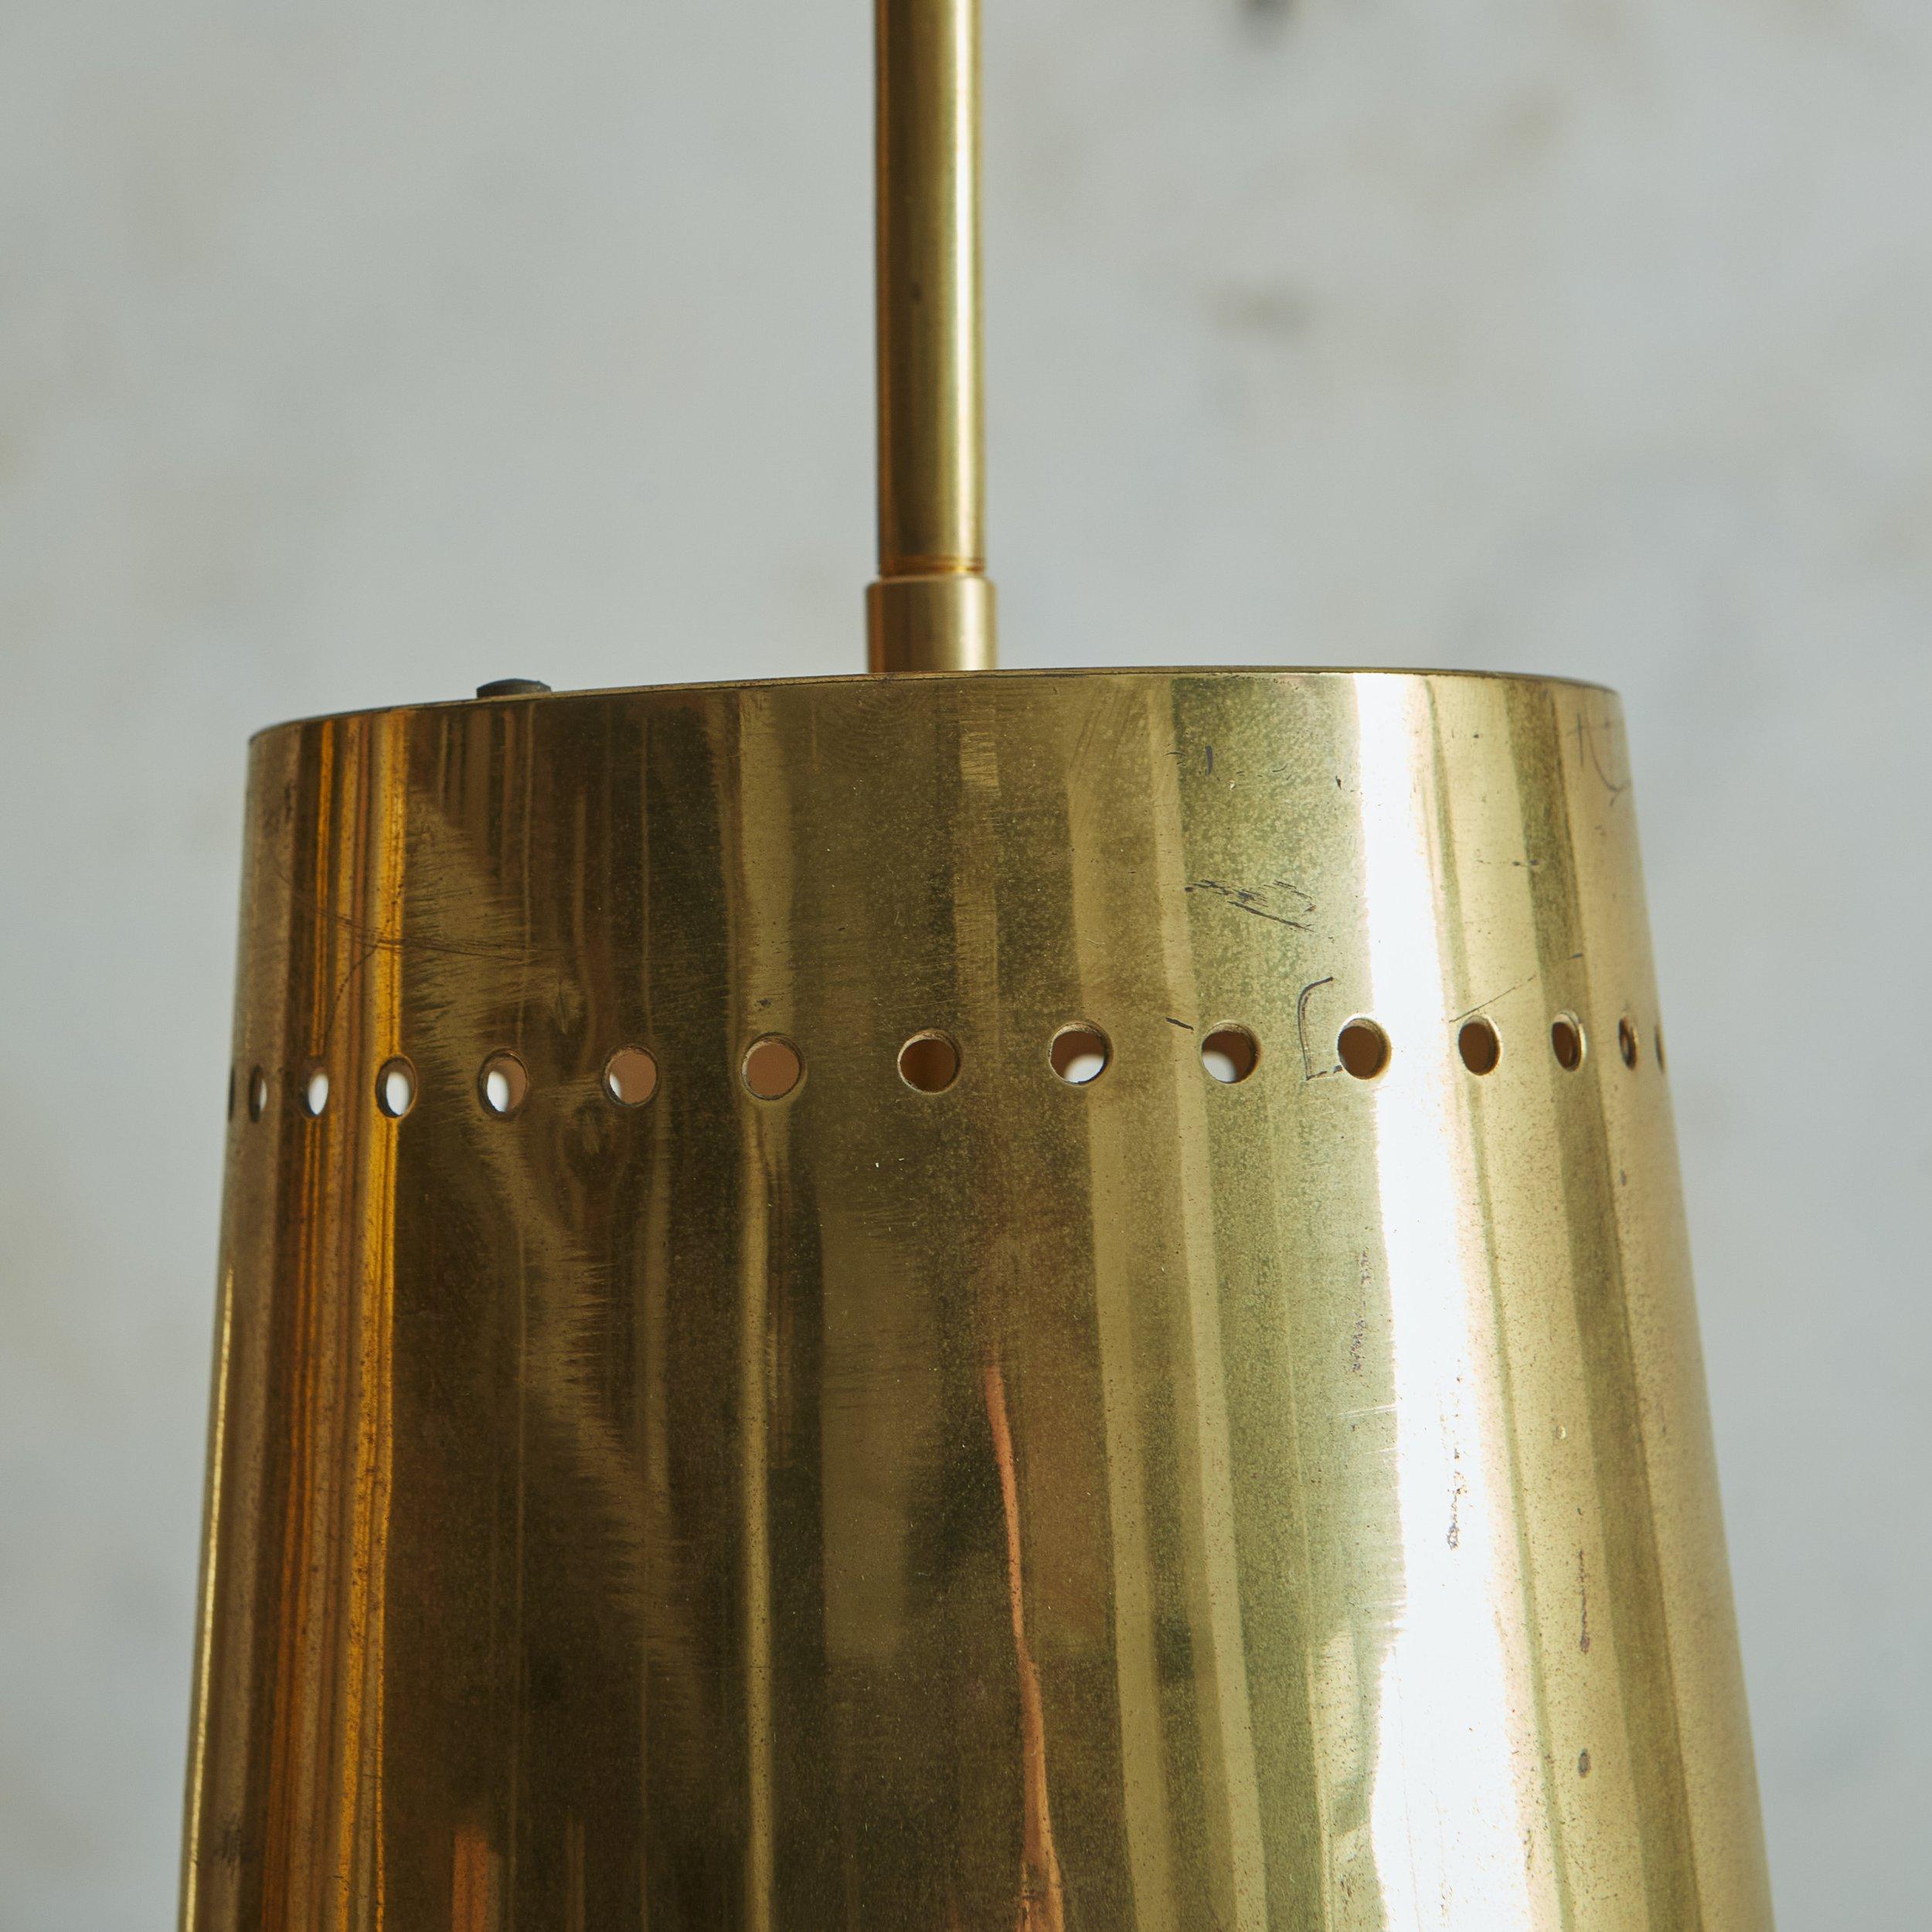 Vintage Brass Pendant Light with Perforated Trim - 2 Available For Sale 2